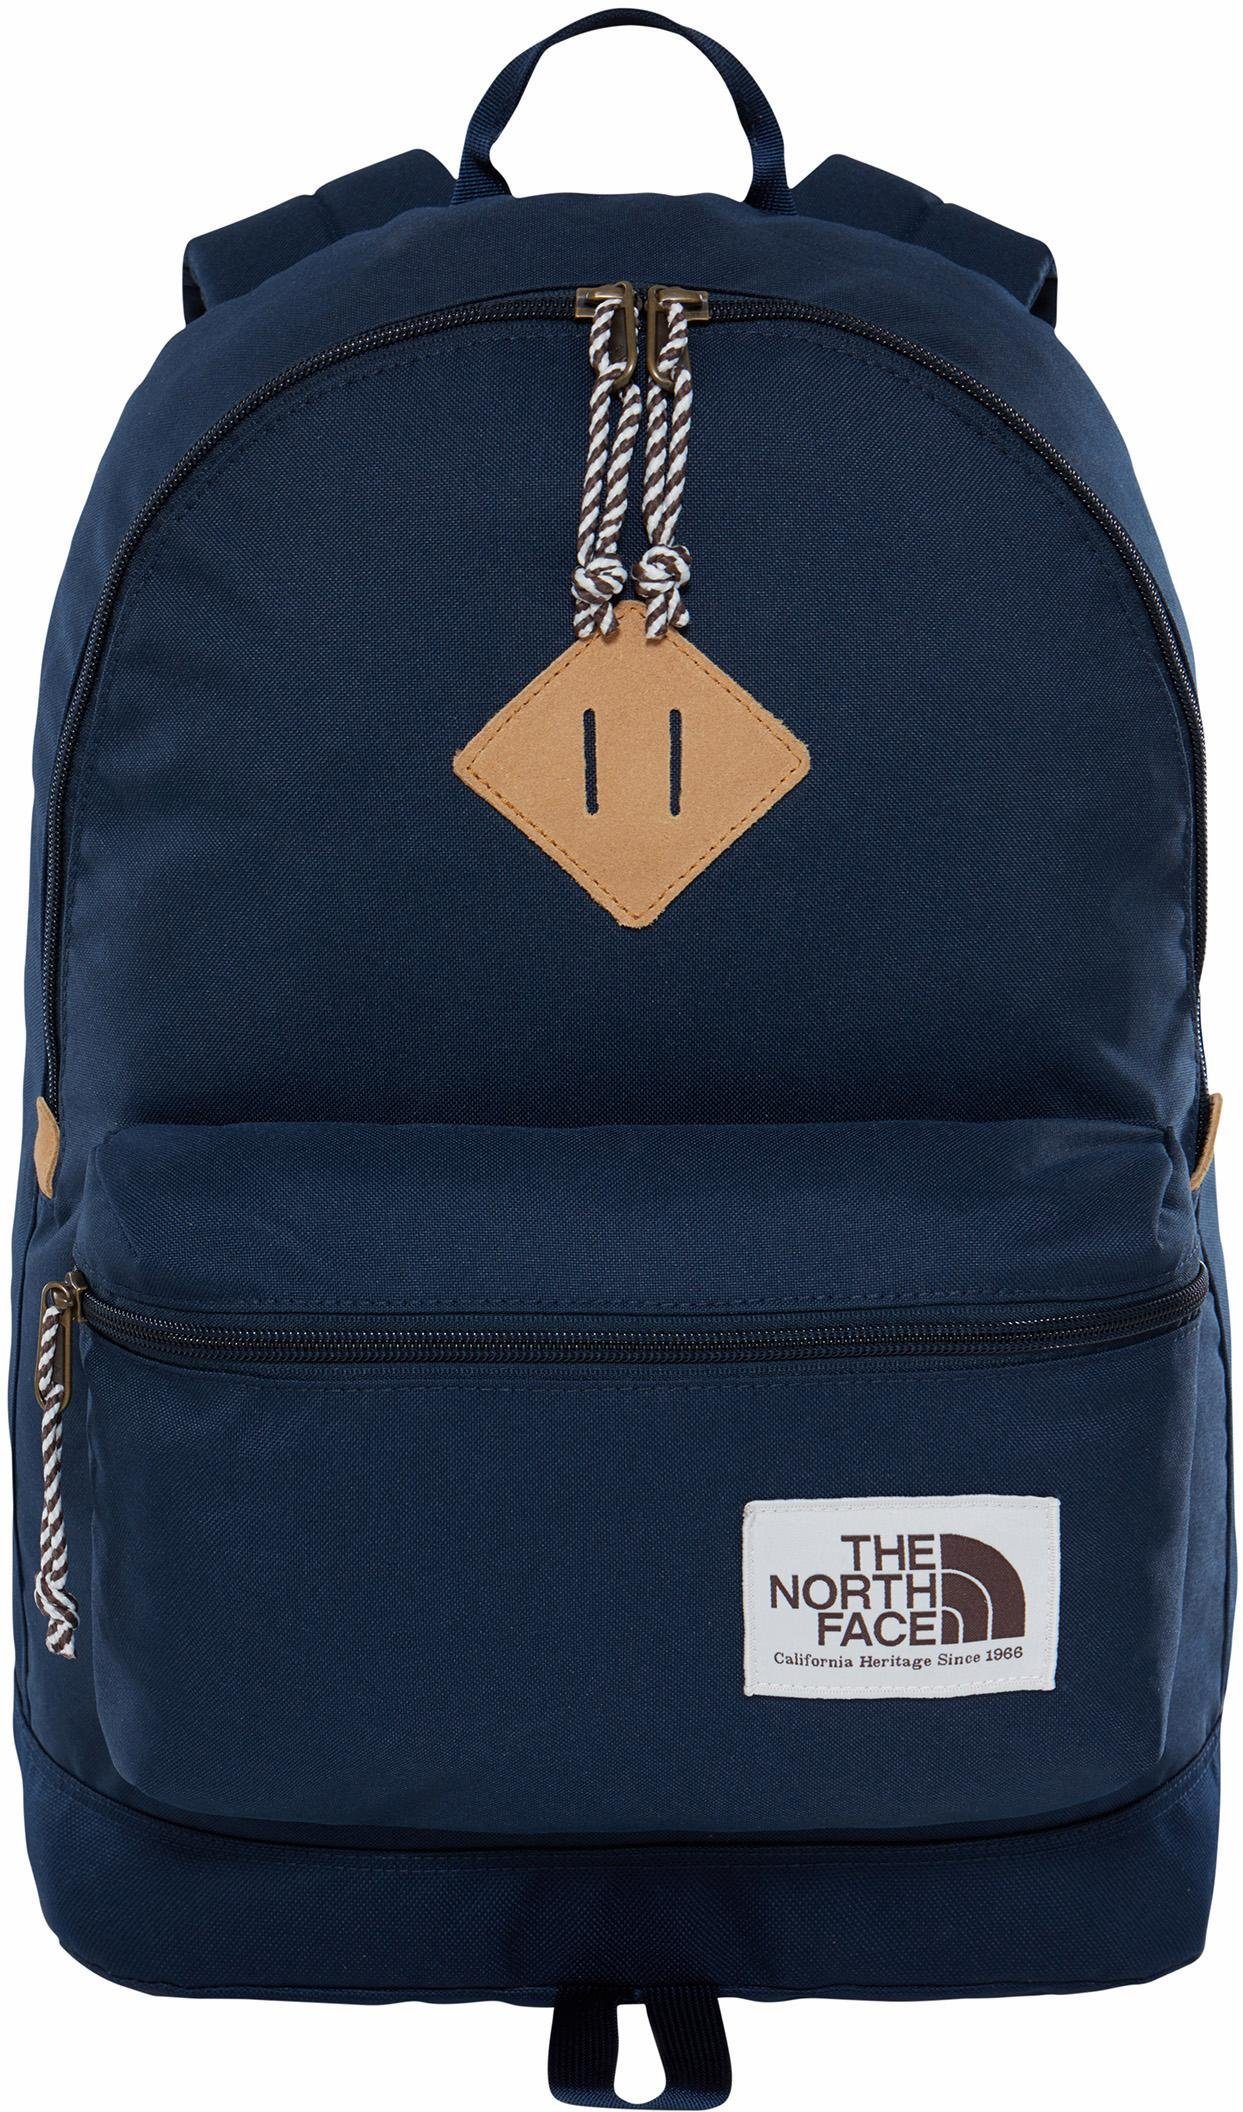 Otto - The North Face NU 15% KORTING: The North Face rugzak, Berkeley